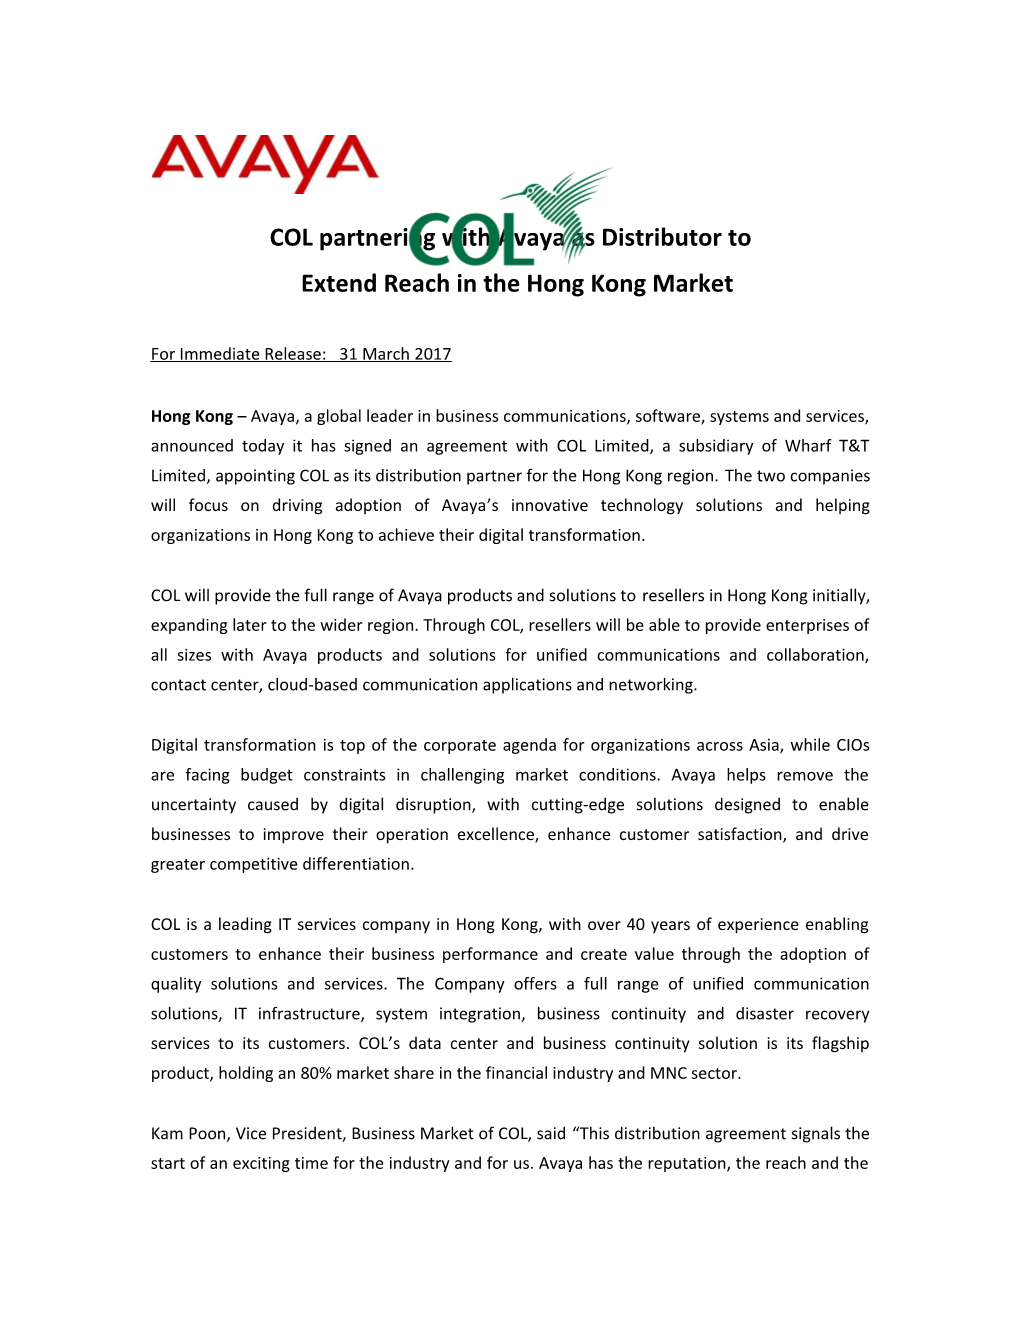 COL Partnering with Avaya As Distributor To